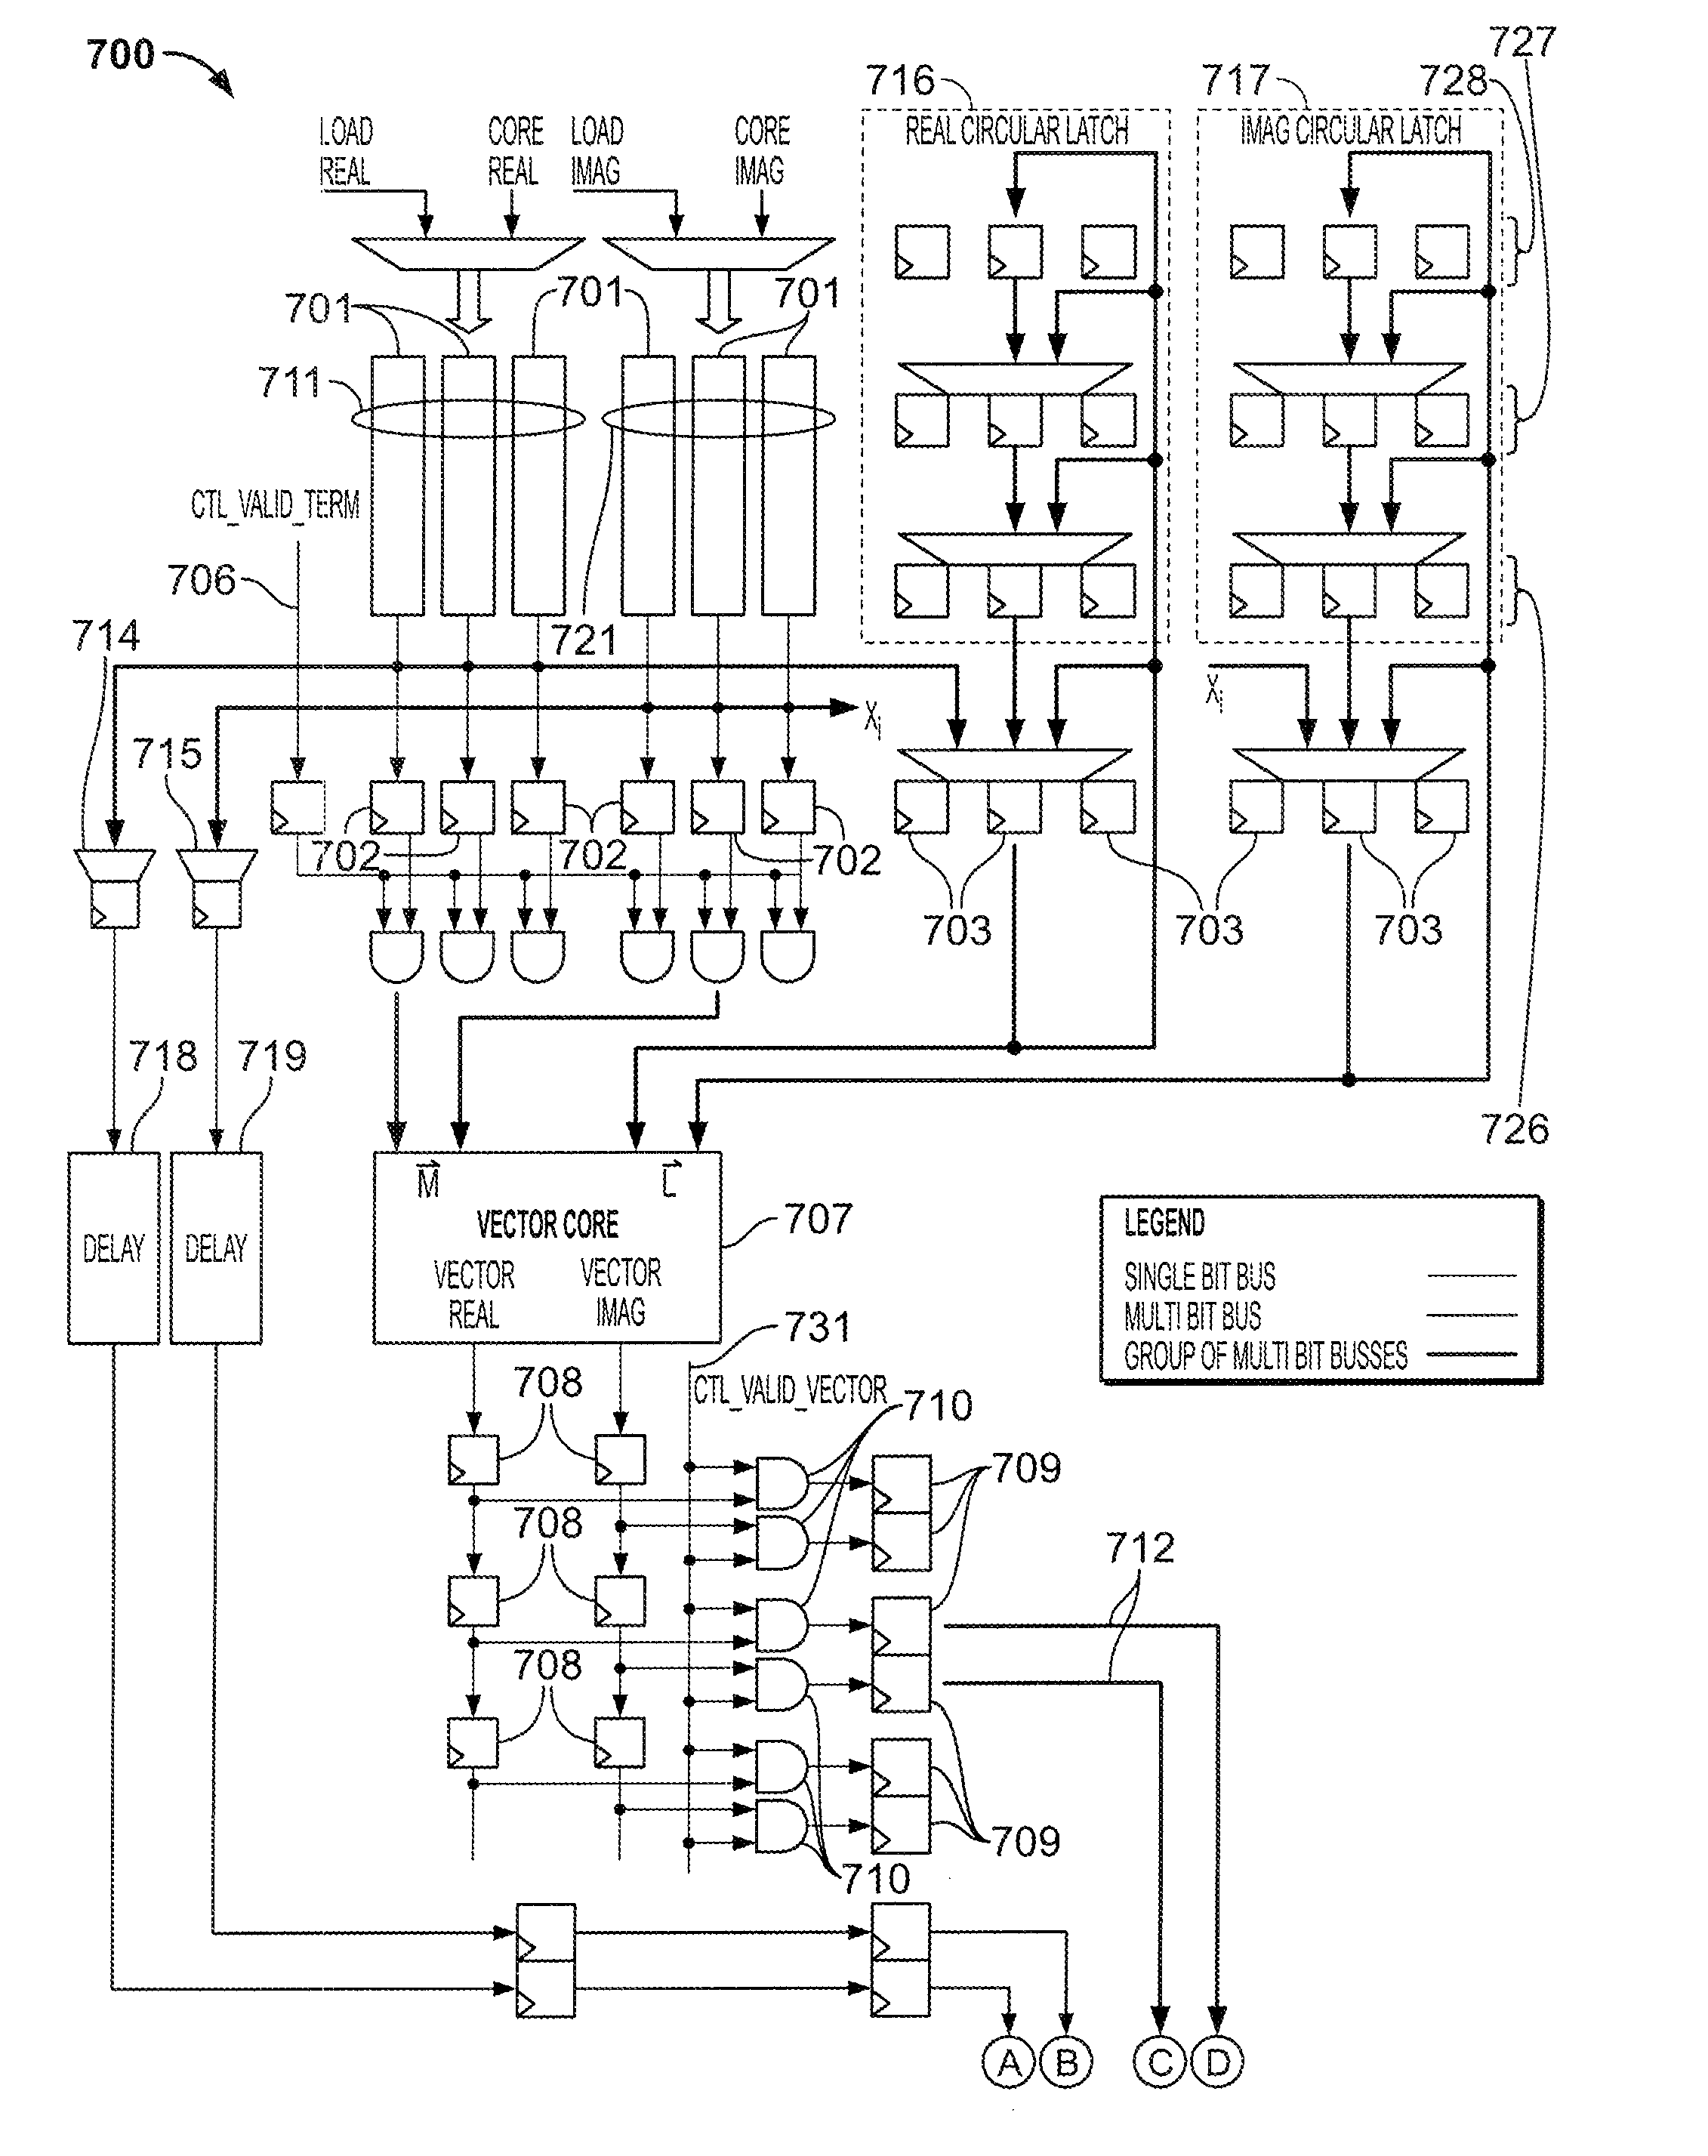 Matrix operations in an integrated circuit device